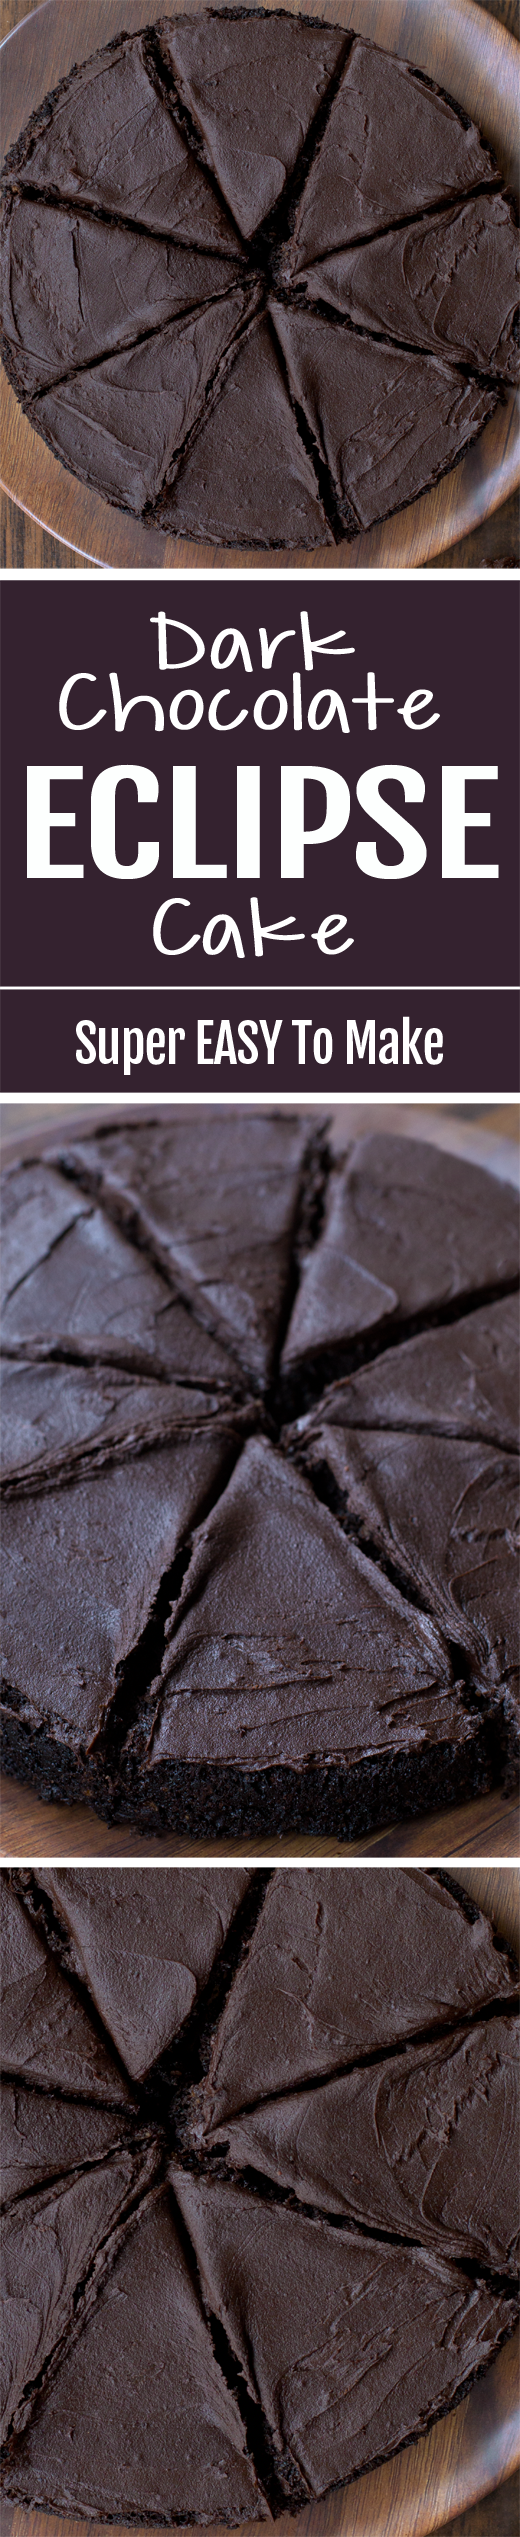 This extra dark chocolate cake is unlike other cake recipes, thanks to one special ingredient.